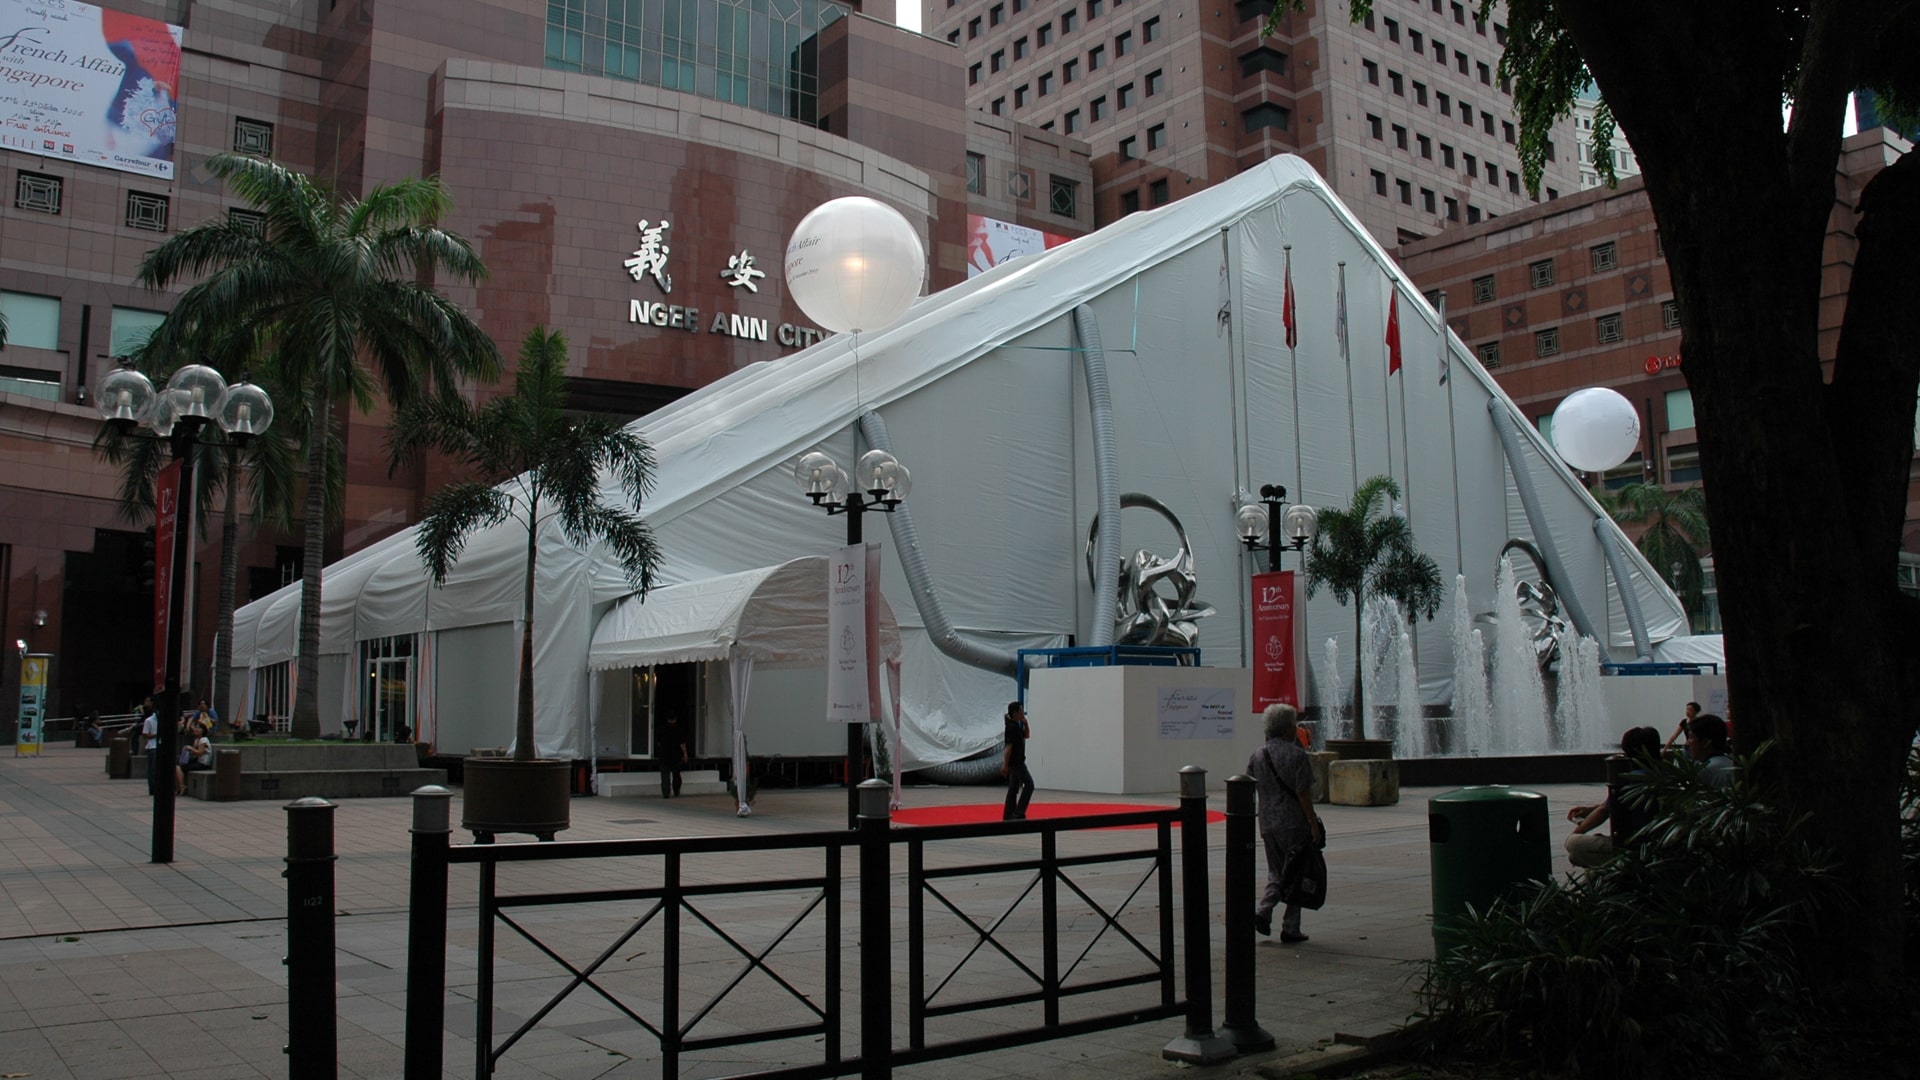 tsc_opt-images_customized-structures_ngee-ann-jewelfest-customized-tent-structure-1920x1080-01-min